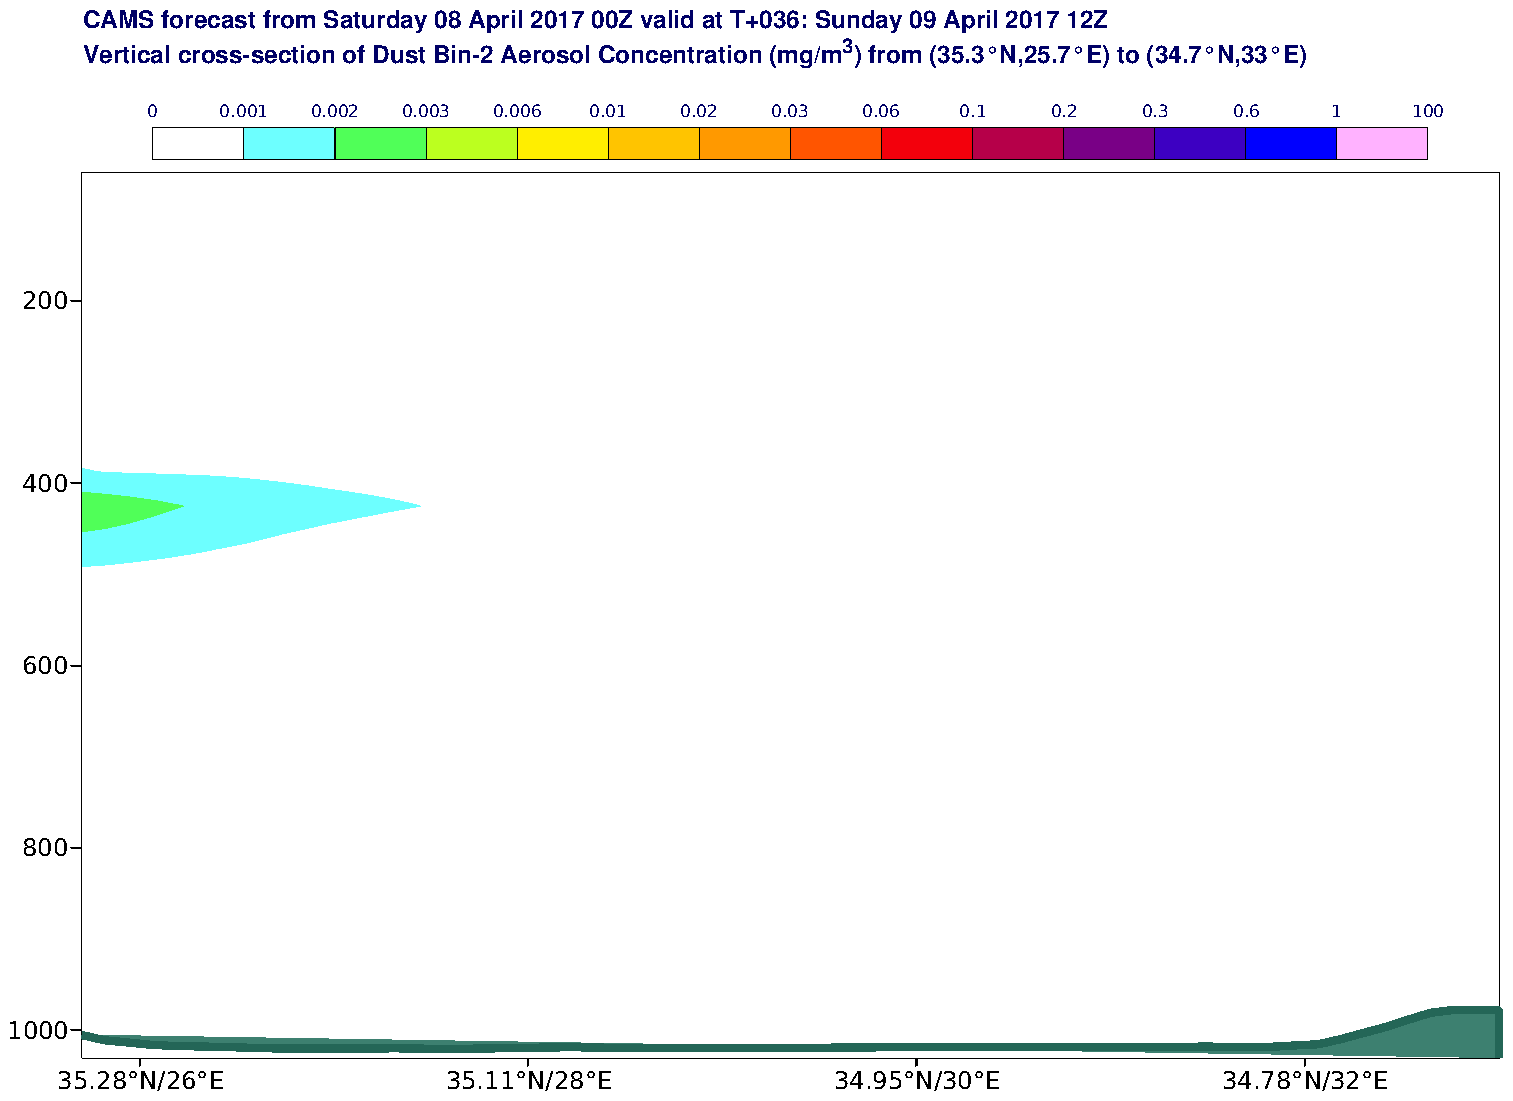 Vertical cross-section of Dust Bin-2 Aerosol Concentration (mg/m3) valid at T36 - 2017-04-09 12:00